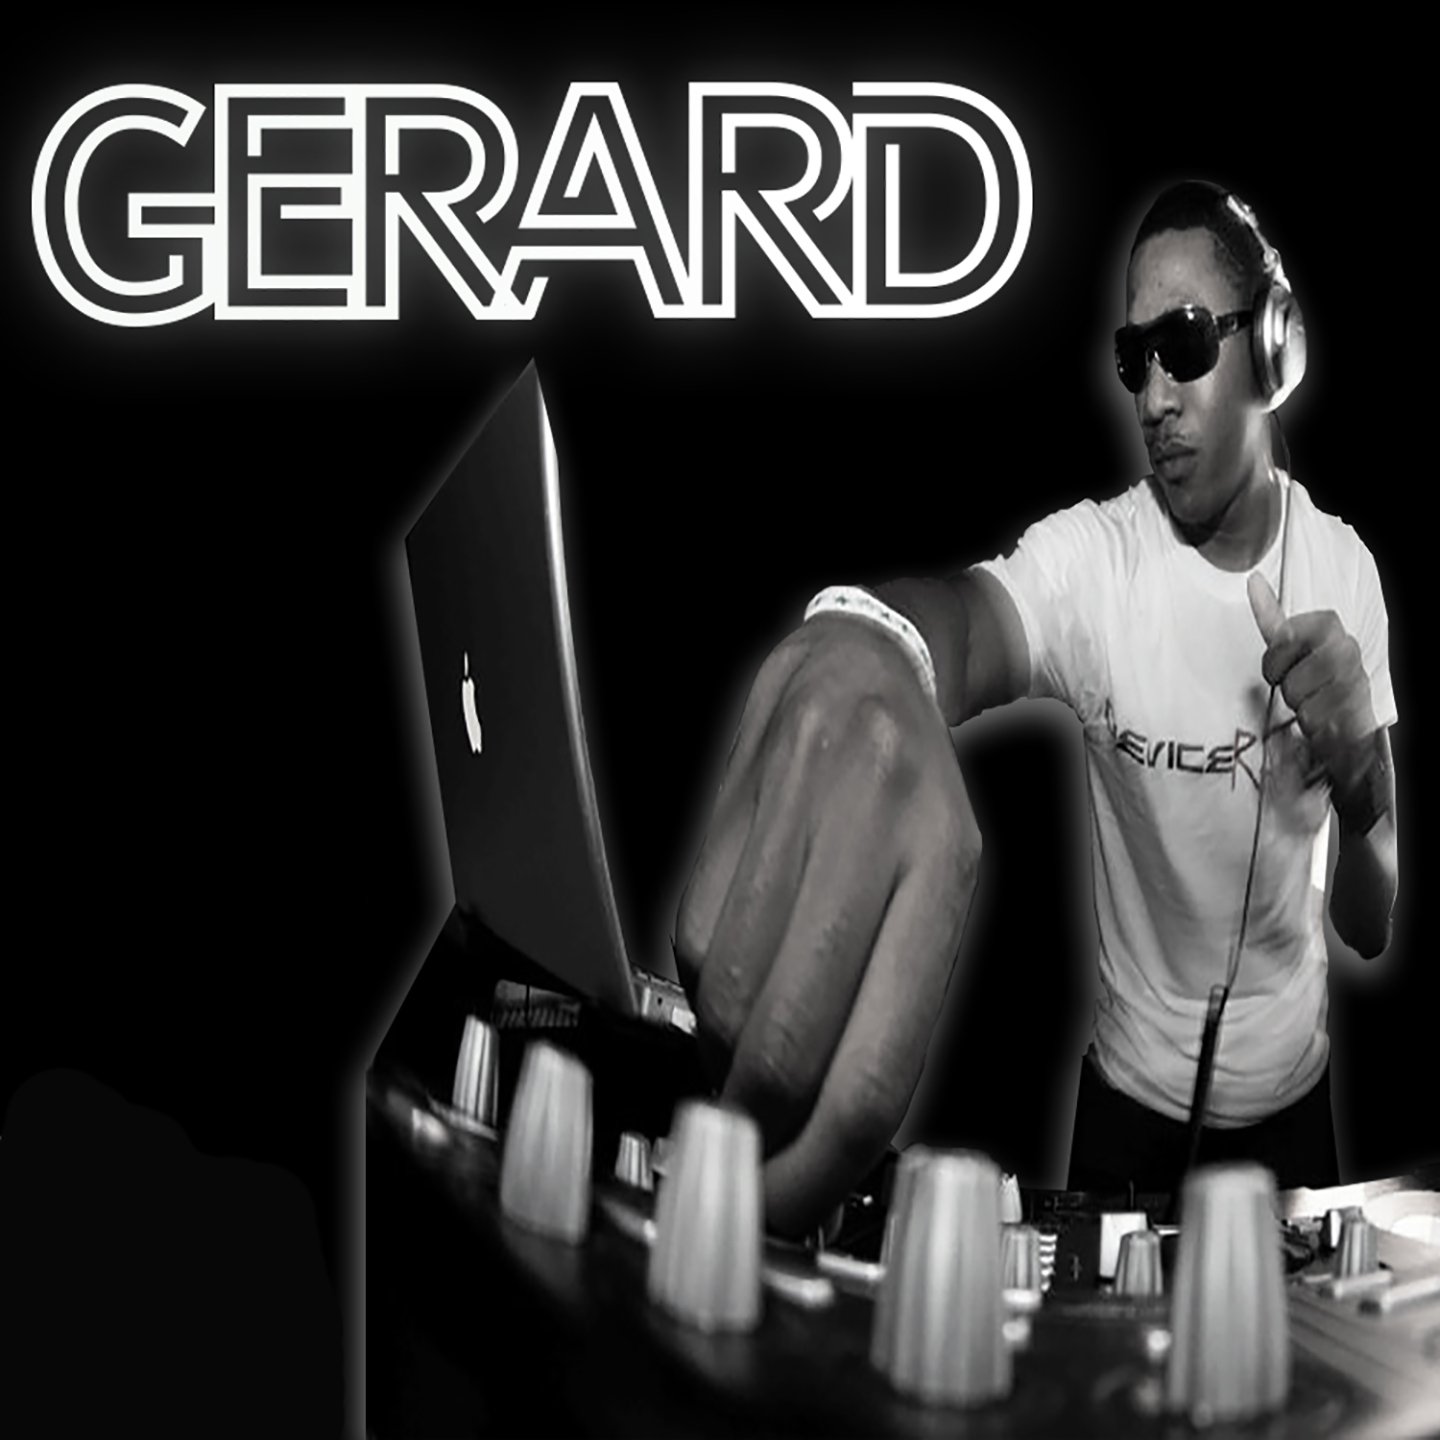 Gerard announces Guest DJ Leo and playlists for his show 'The Hit List' 16.